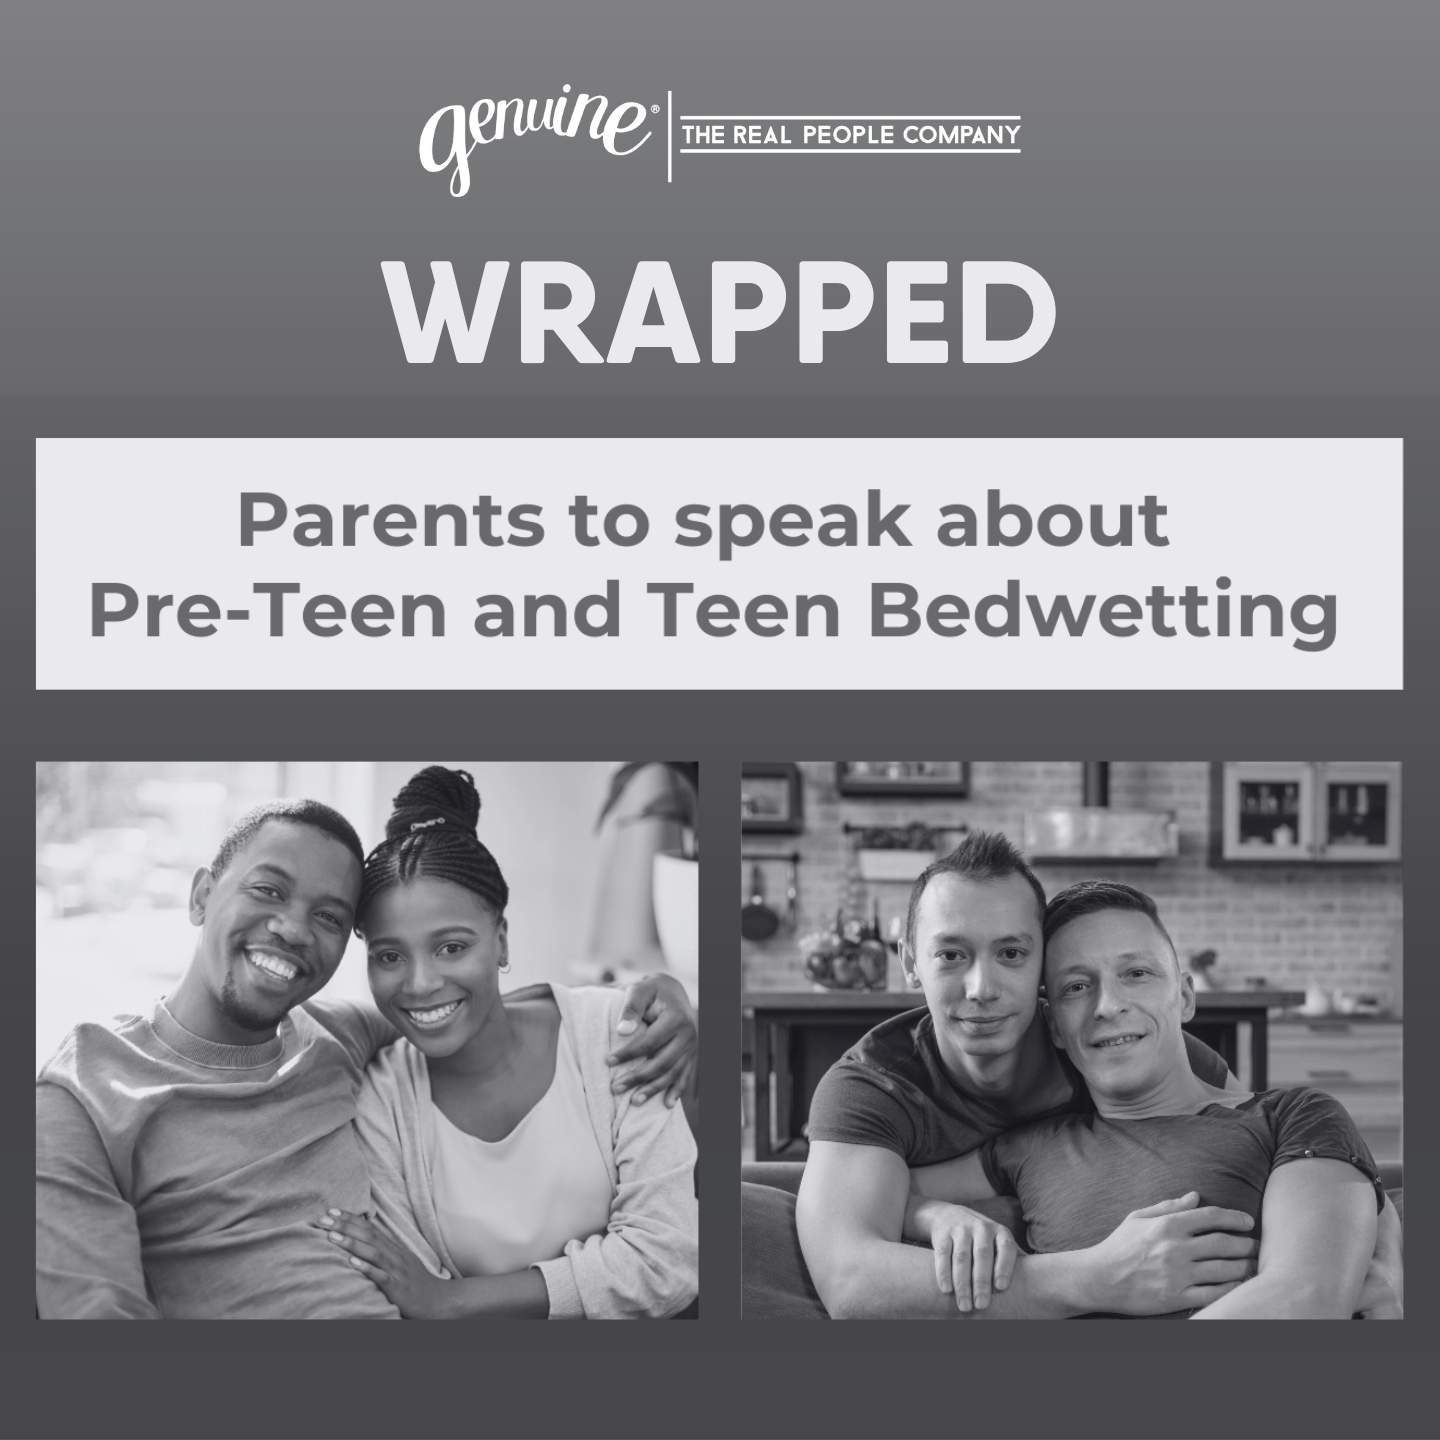 CASTING: PARENTS TO SPEAK OPENLY ABOUT CHILDHOOD BEDWETTING